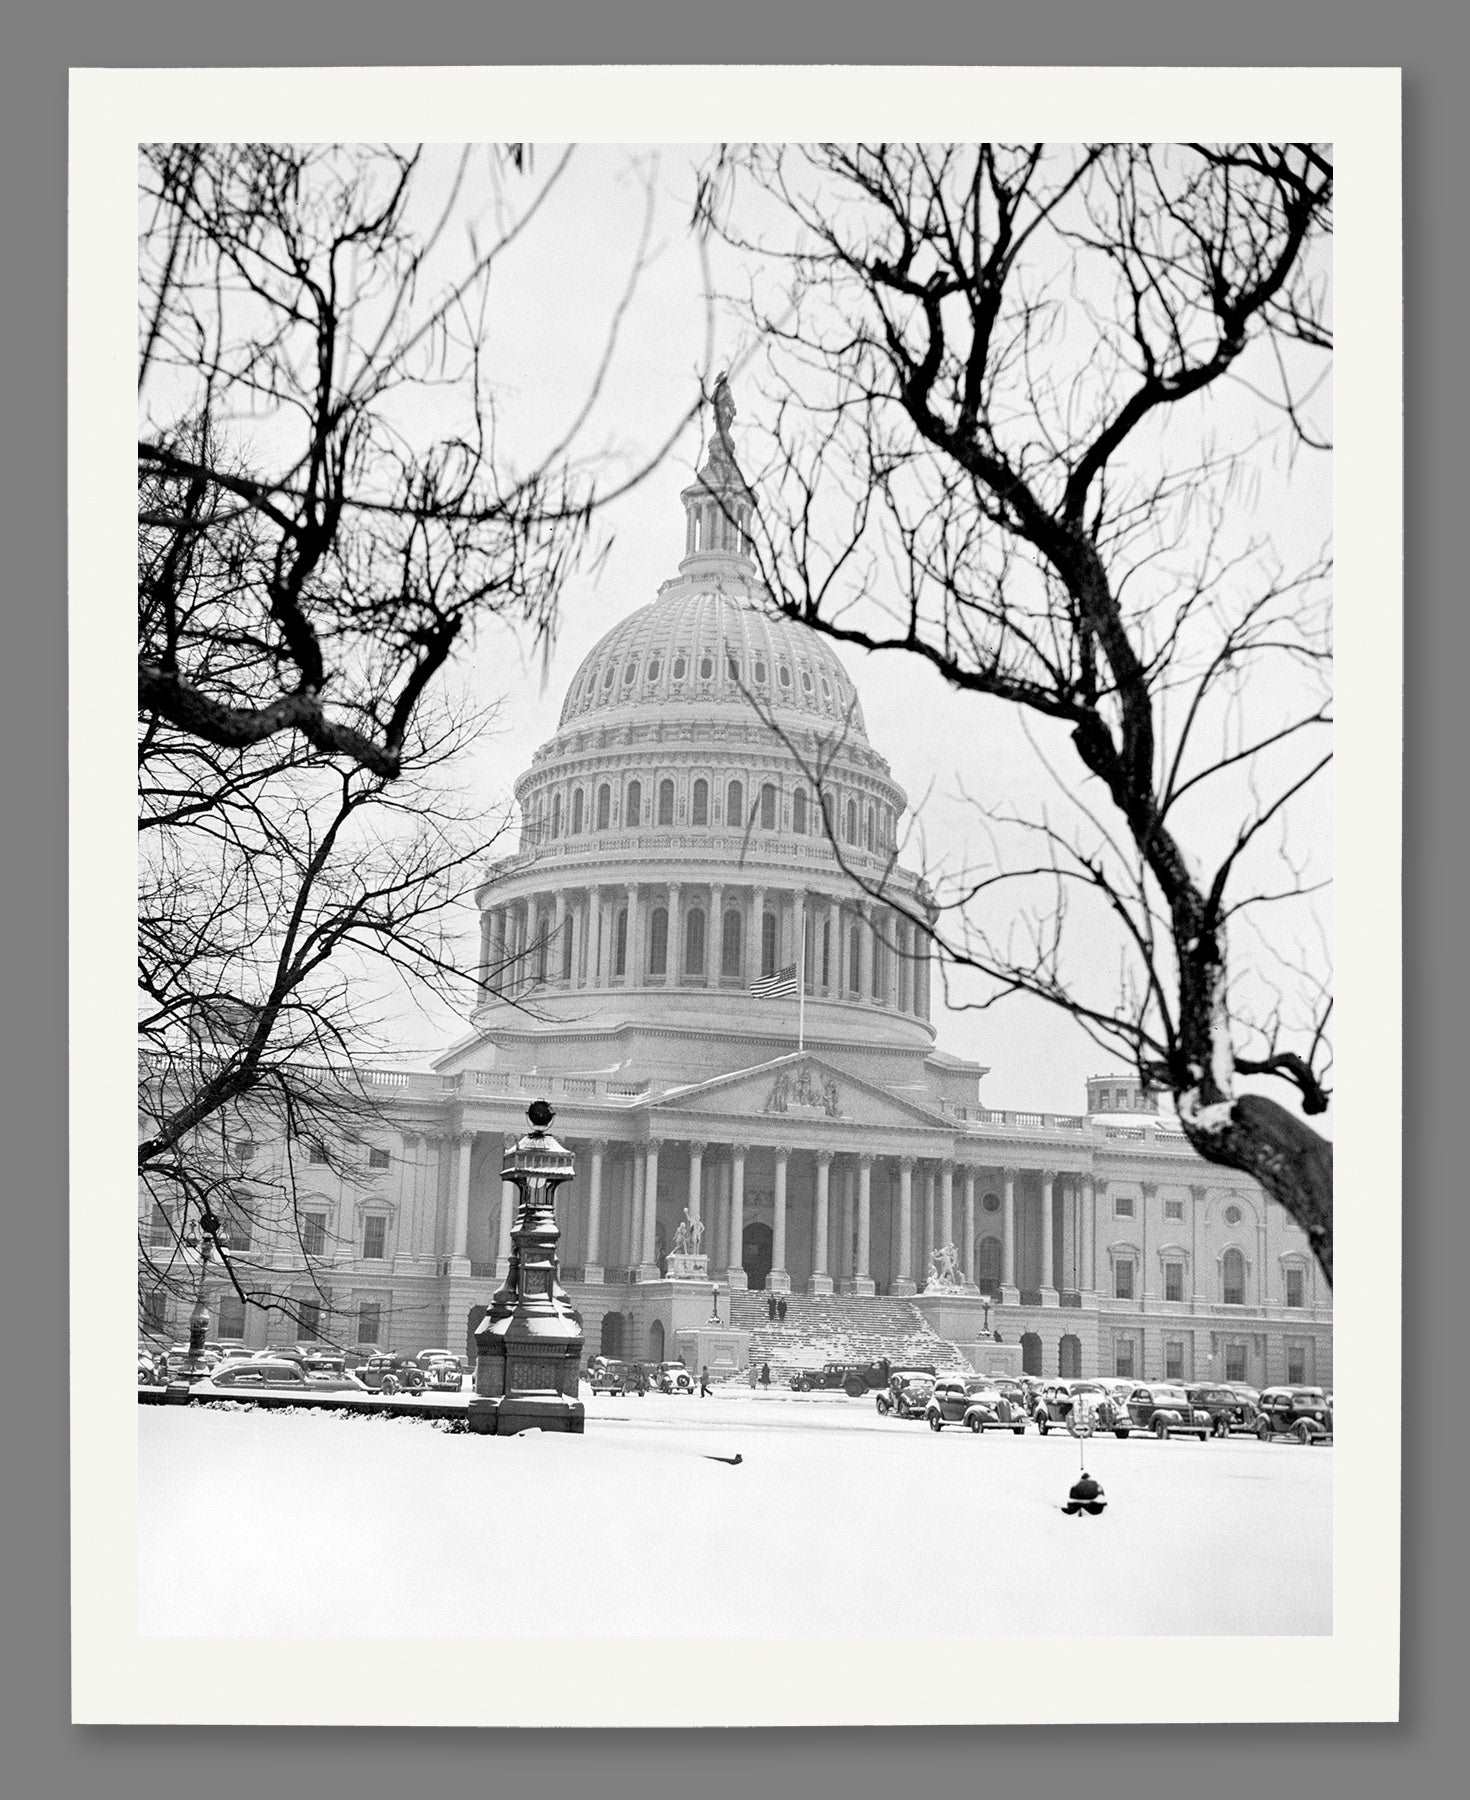 A fine art paper reproduction print of a vintage photo of the US Capitol in winter